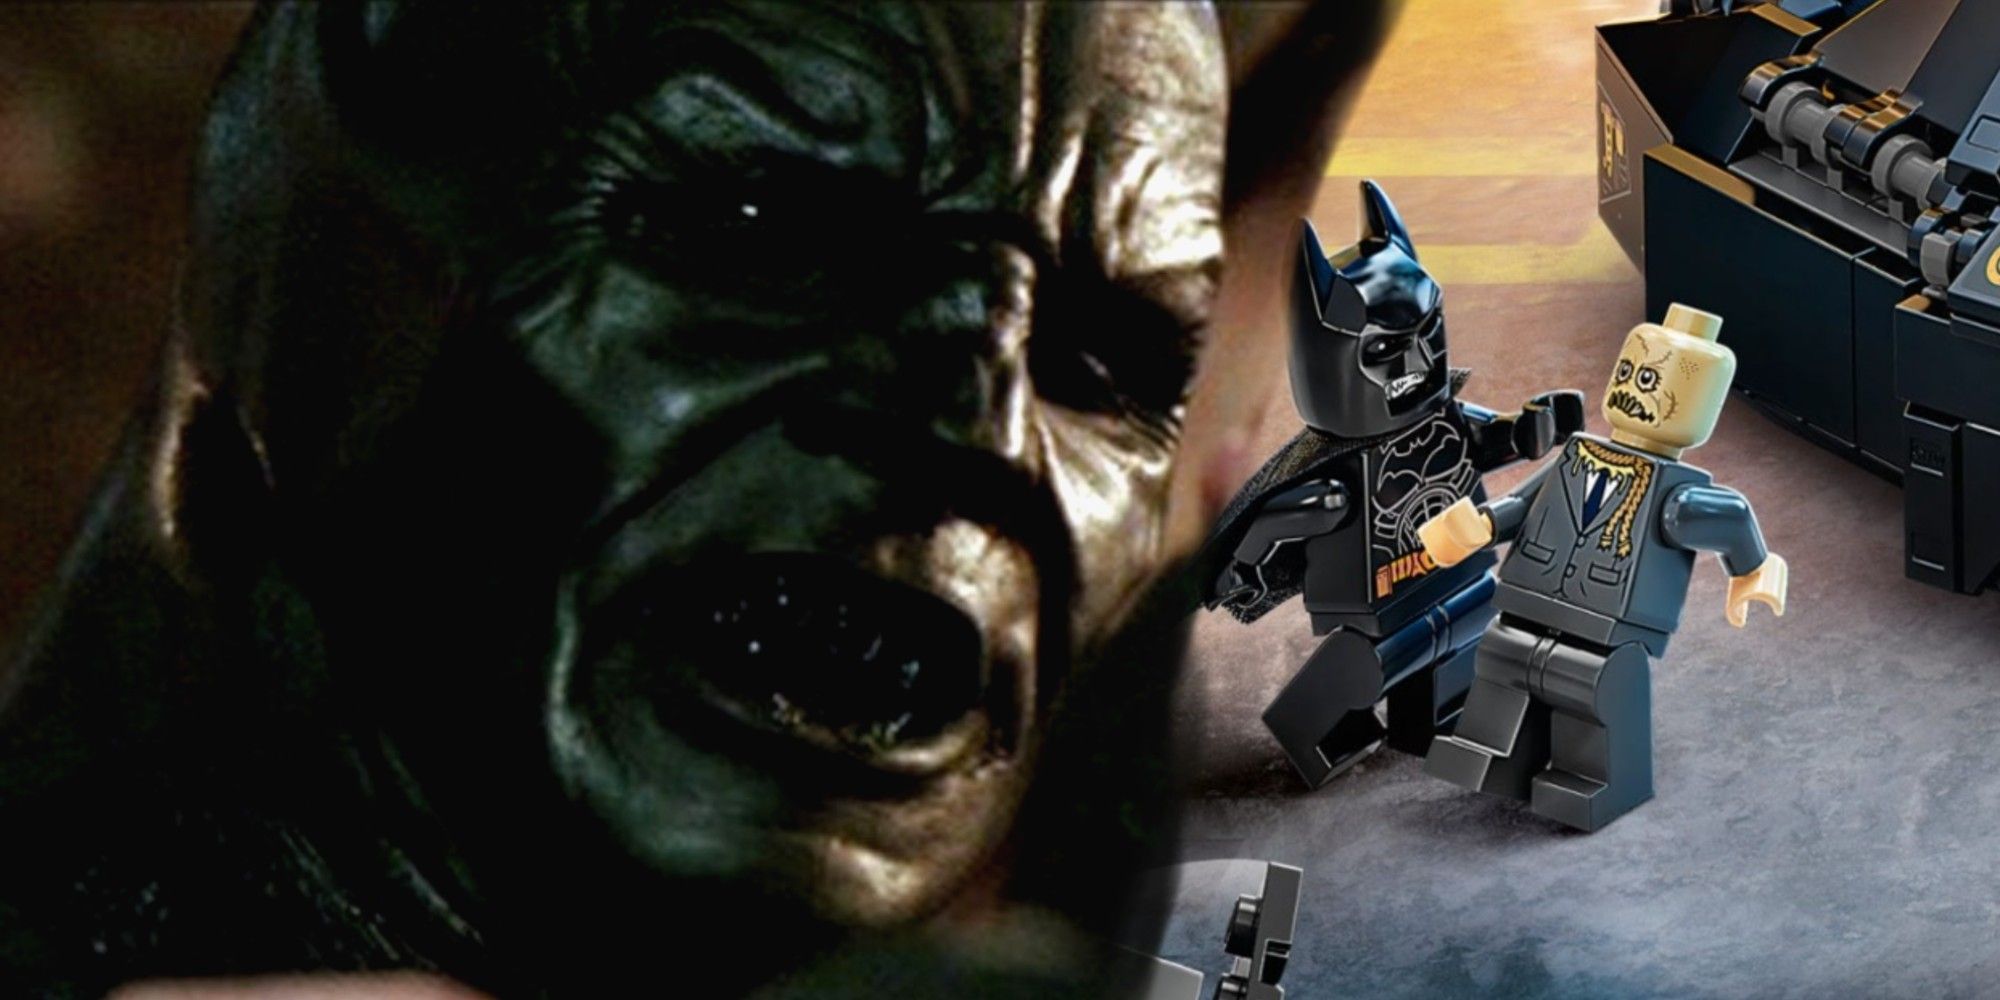 Batman Begins' Creepy Scarecrow Vision Recreated In New LEGO Toy